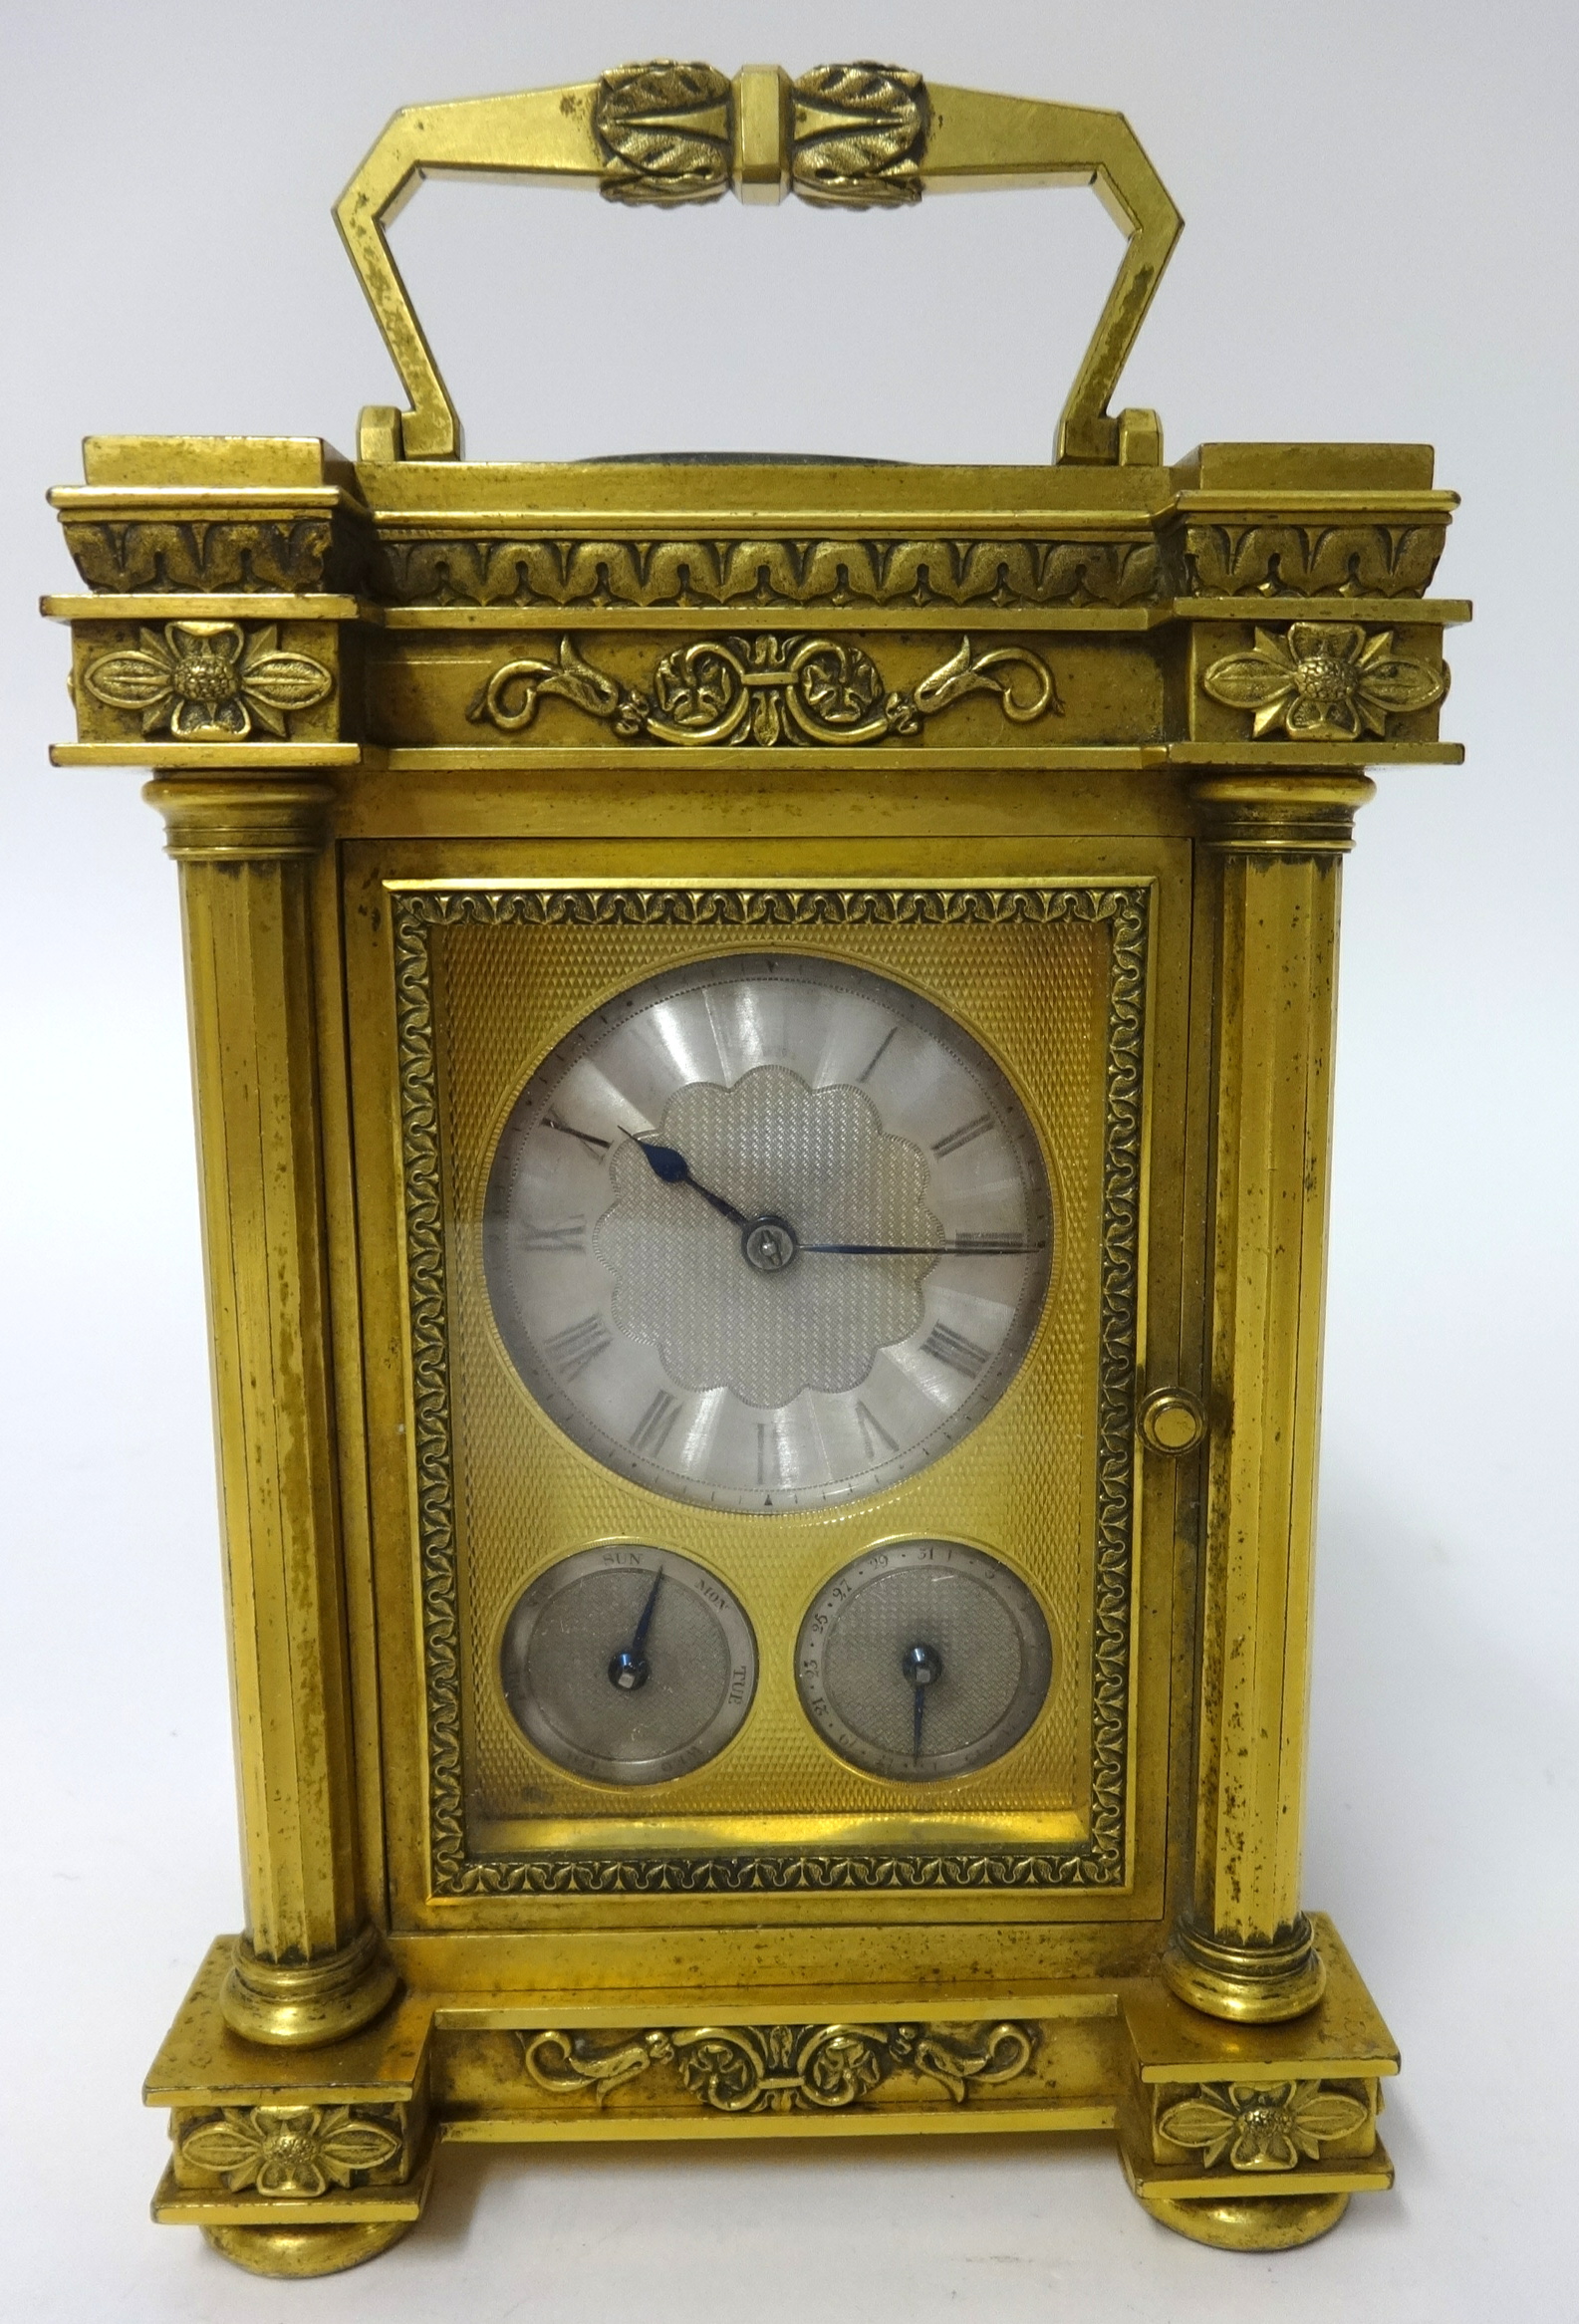 Brockbank & Atkins, London, an English brass cased carriage clock, key wind movement, with - Image 4 of 7